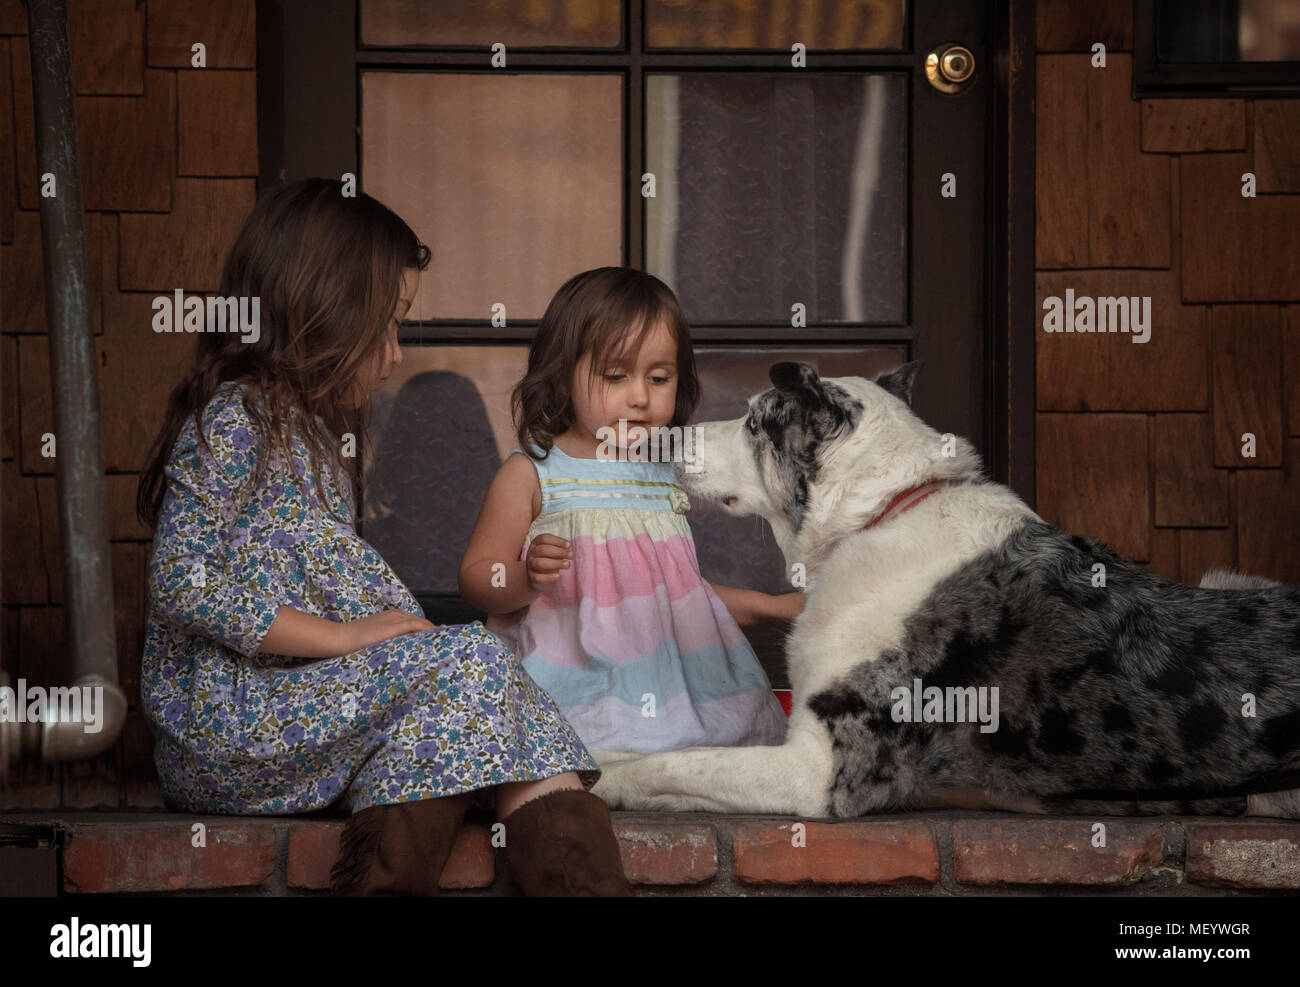 Two Little Girls Sitting With a Dog Stock Photo